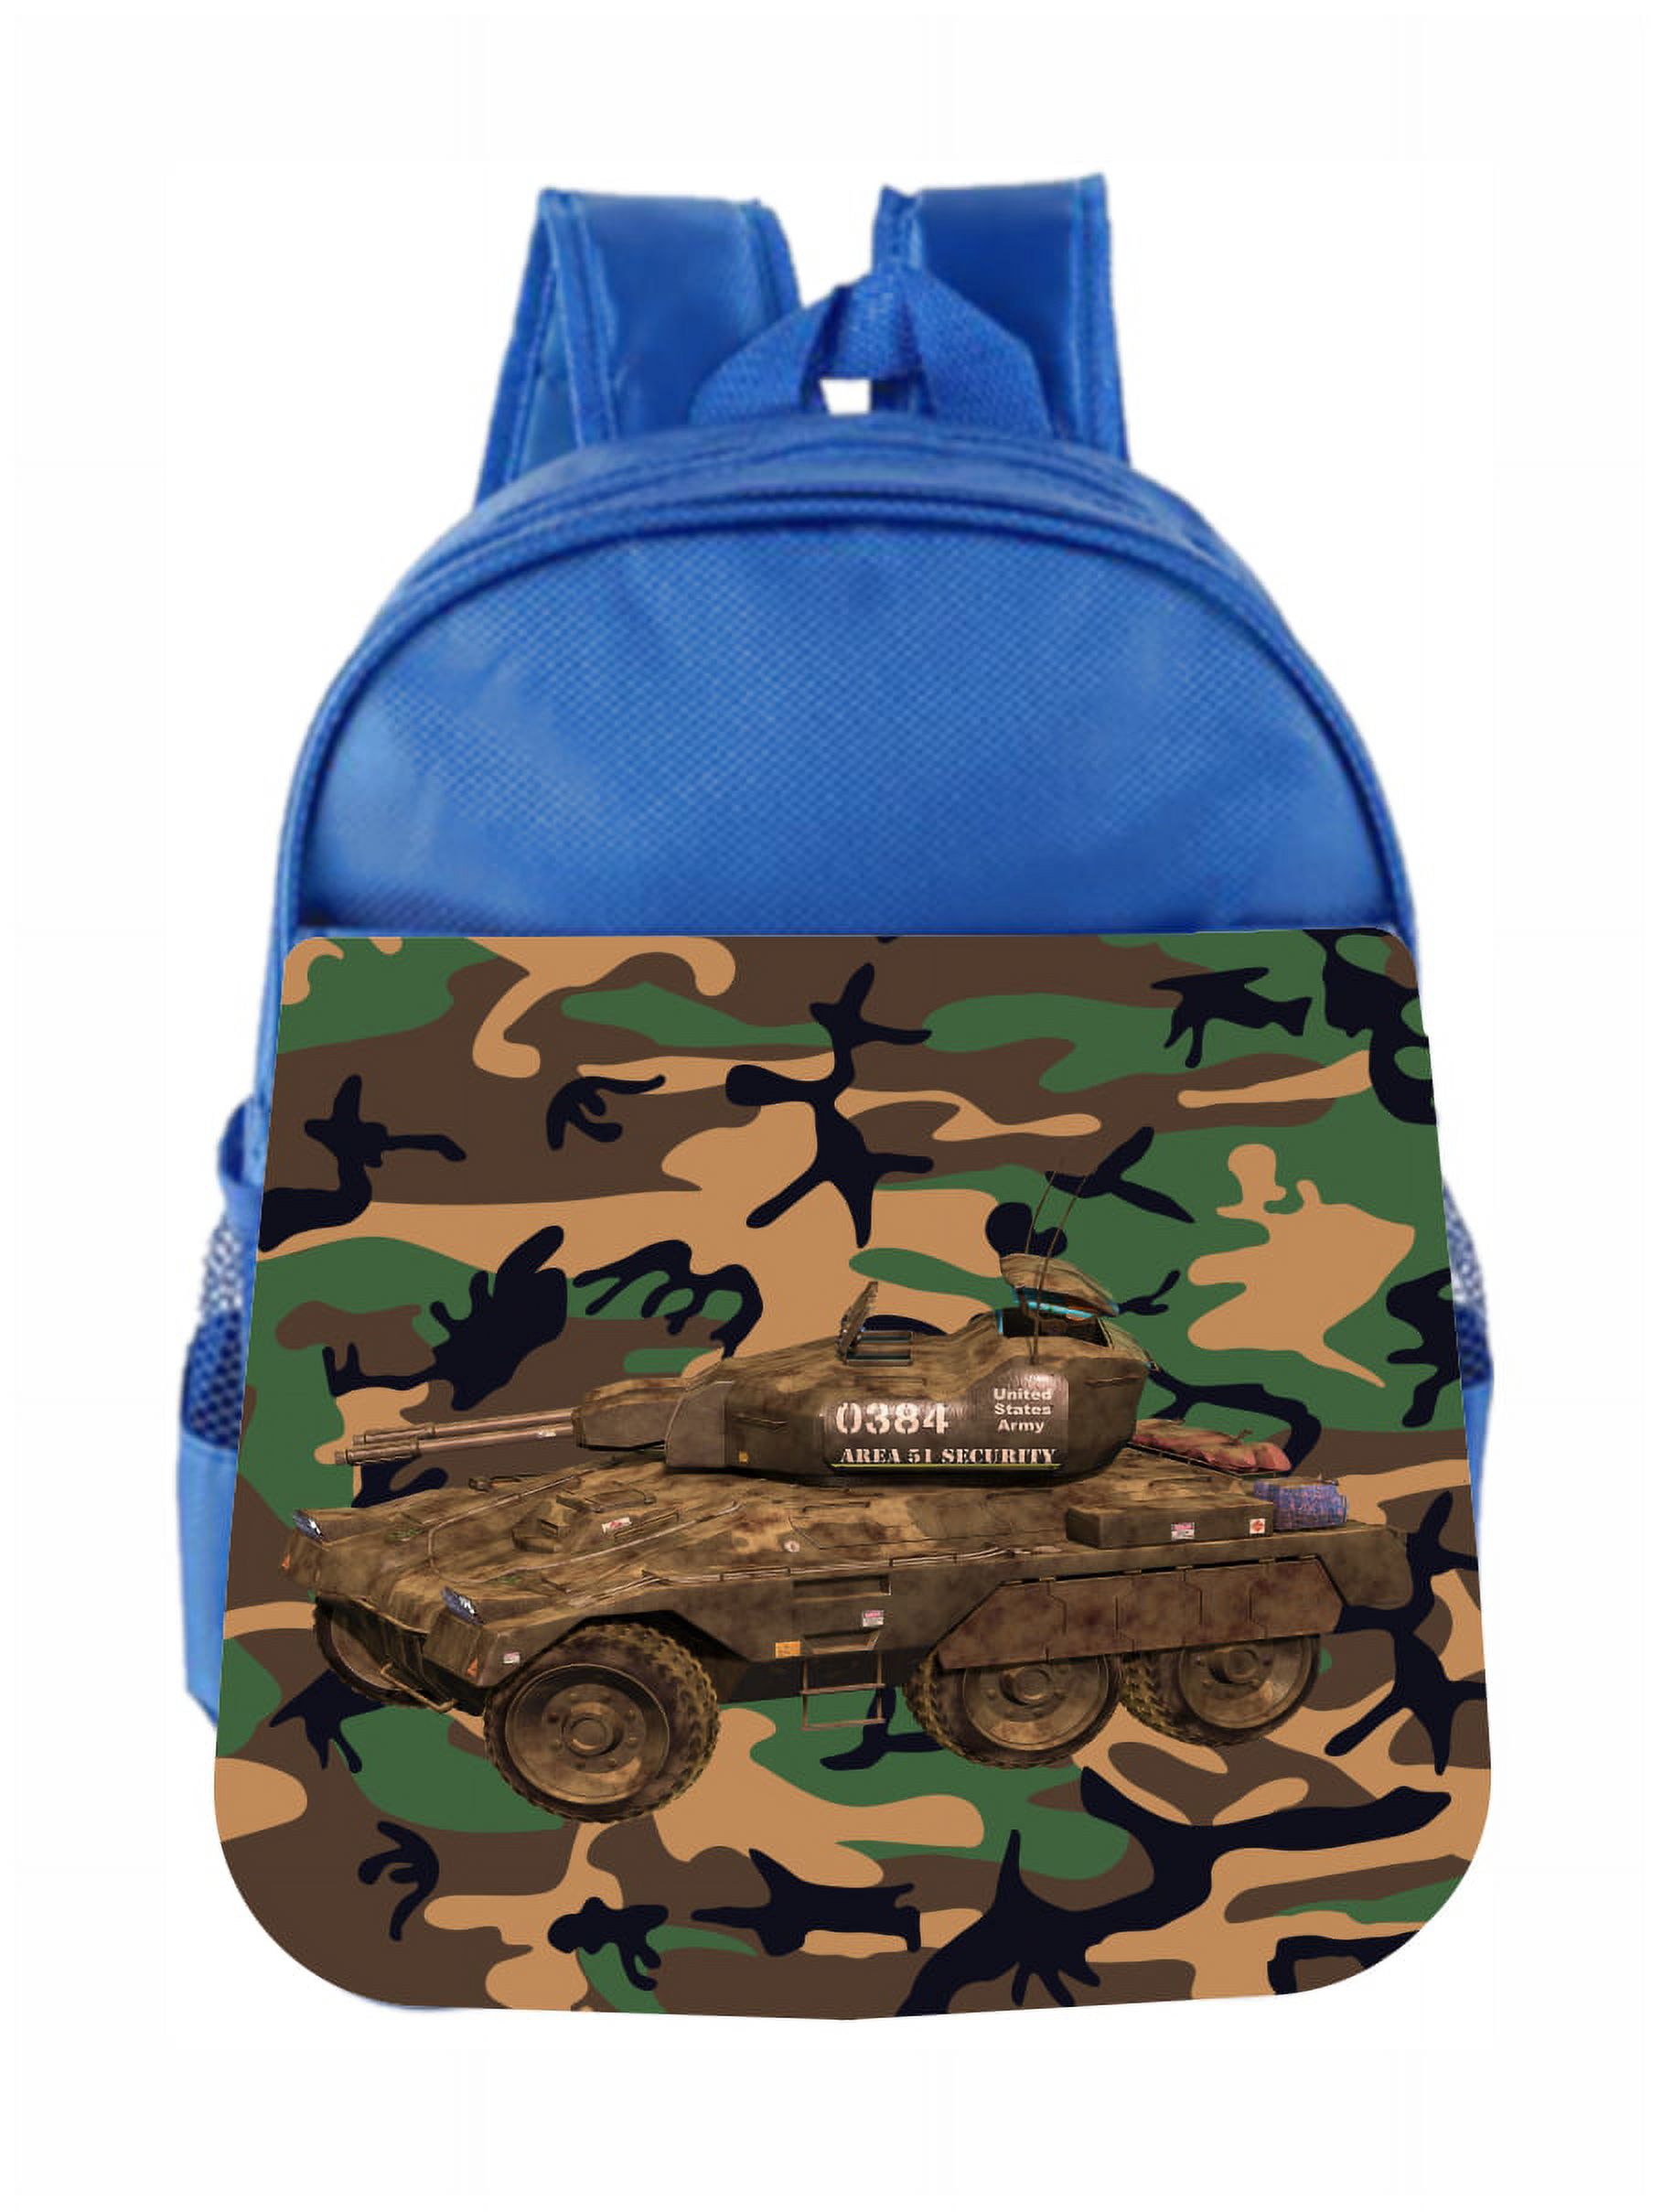 Preschool Backpack Camo Army Tank Kids Backpack Toddler - image 1 of 4